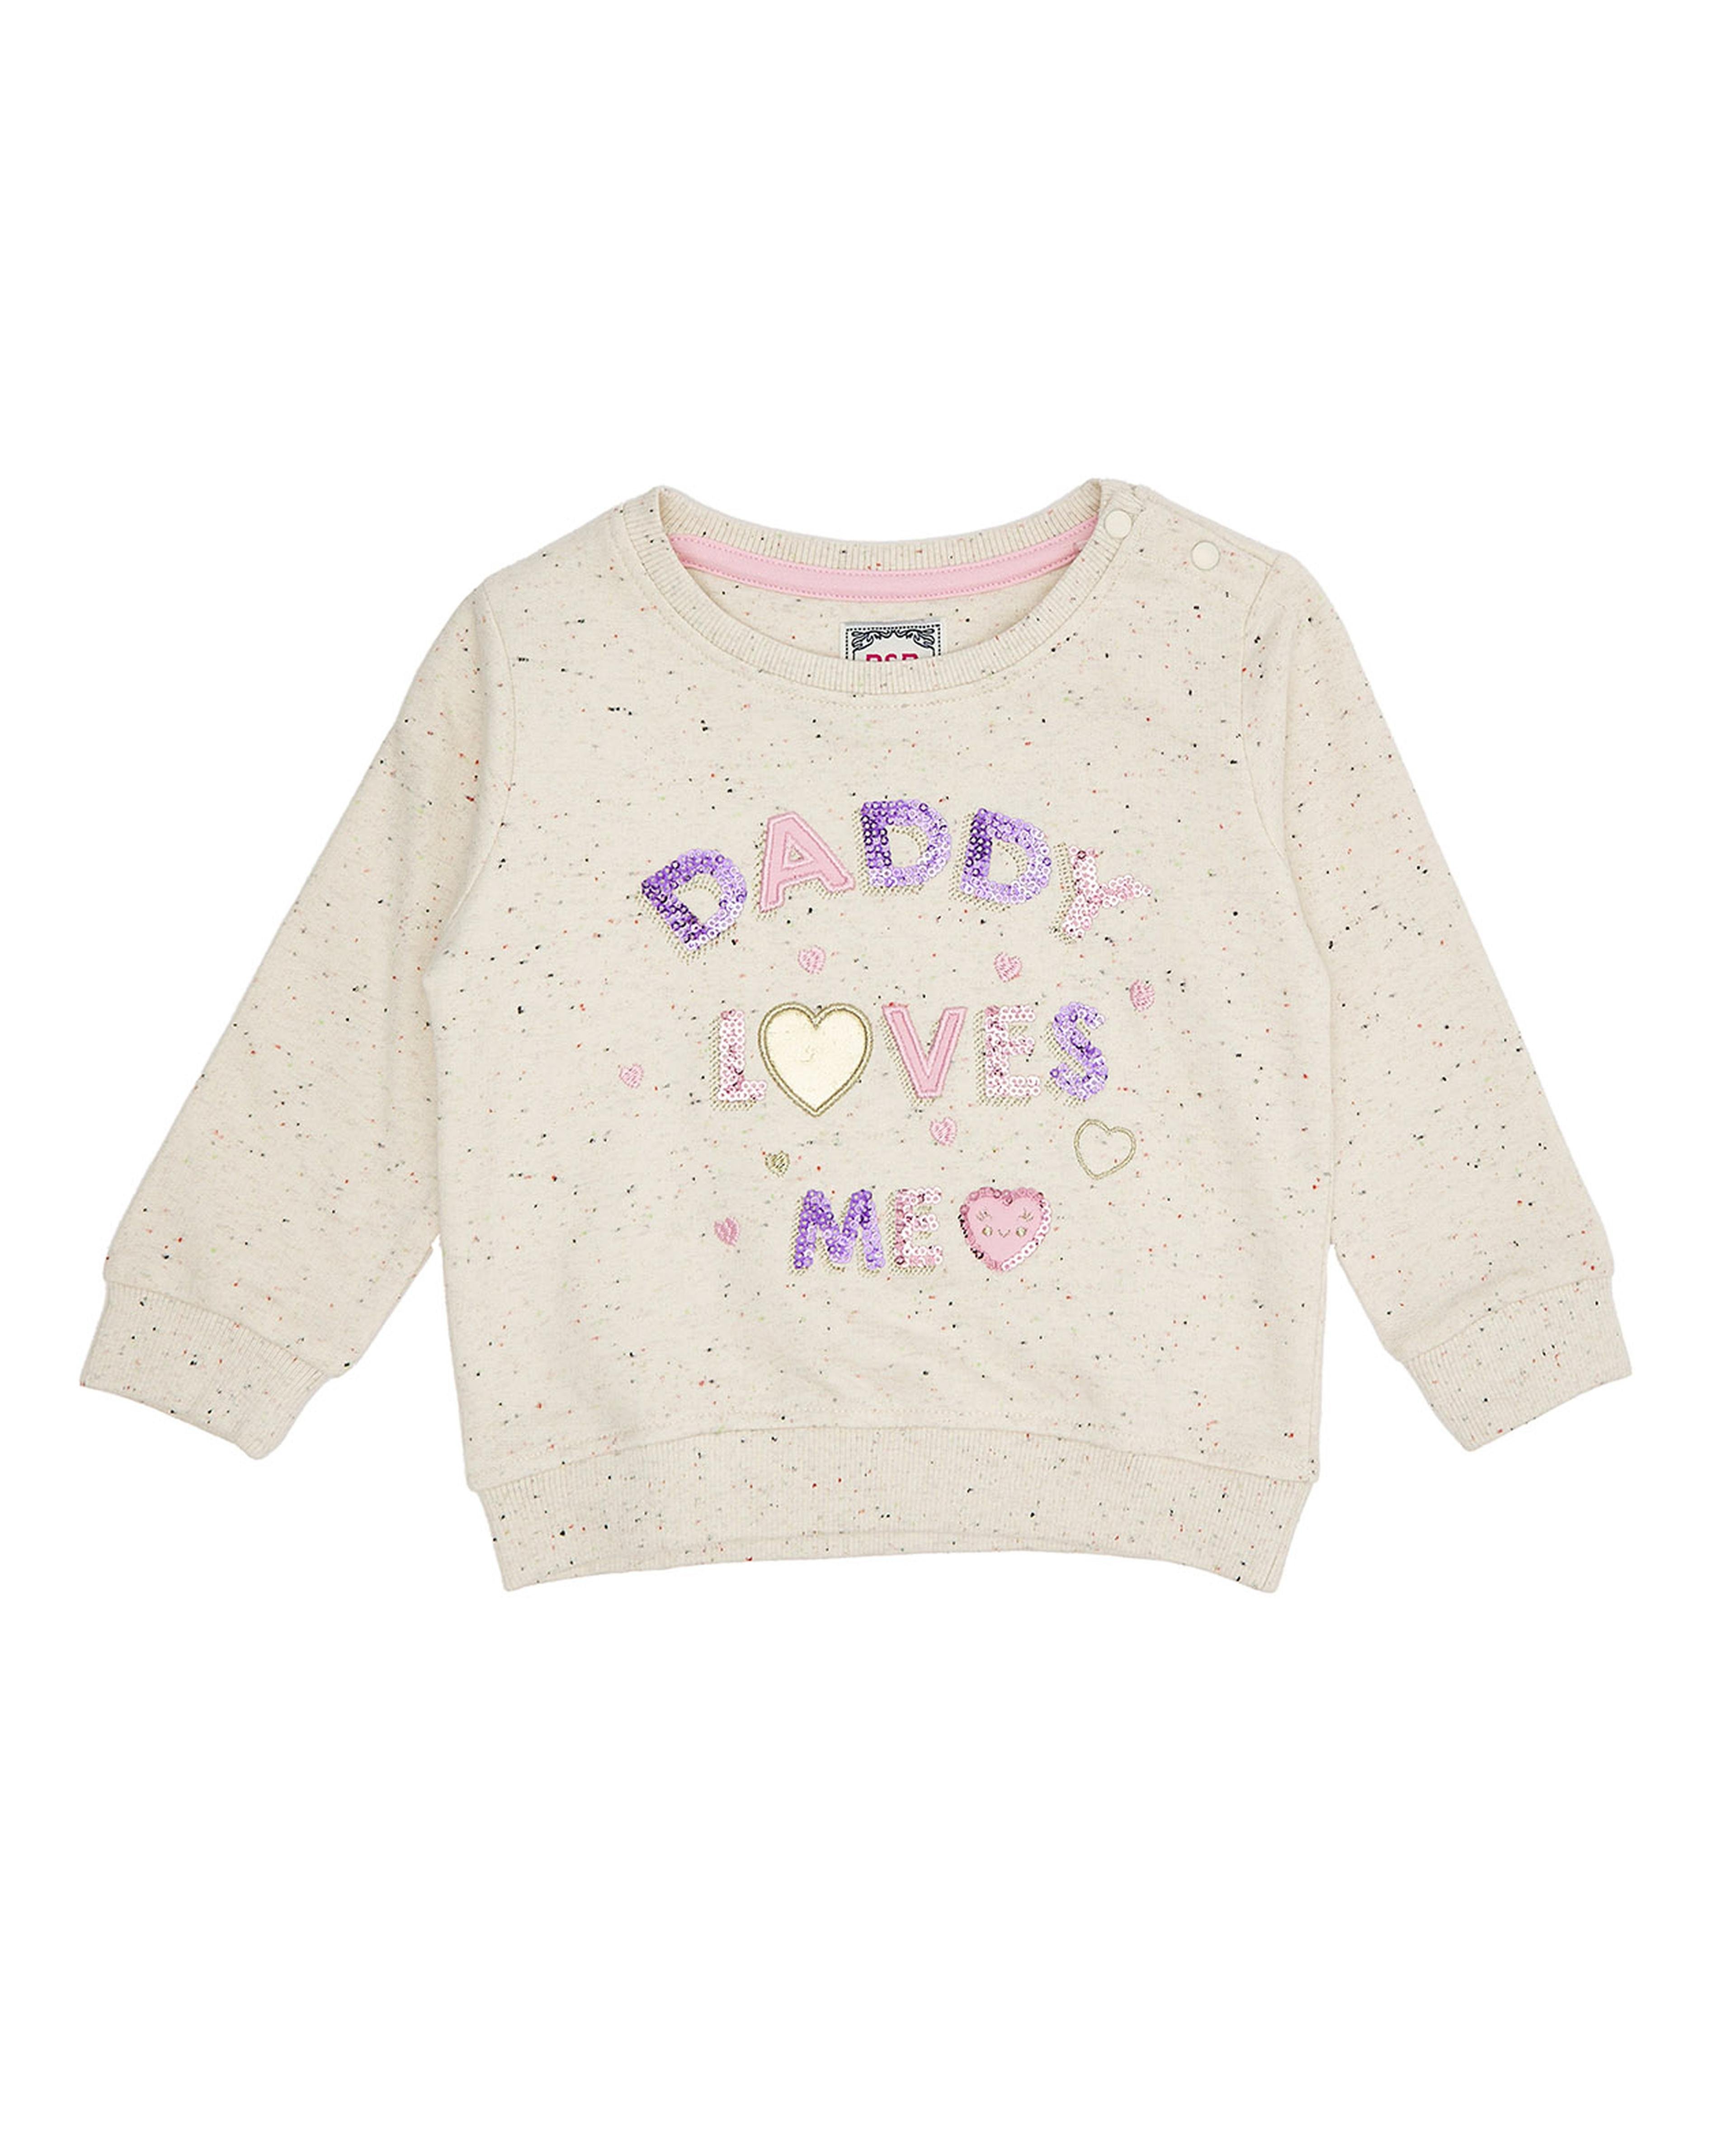 Sequined Sweatshirt with Crew Neck and Long Sleeves